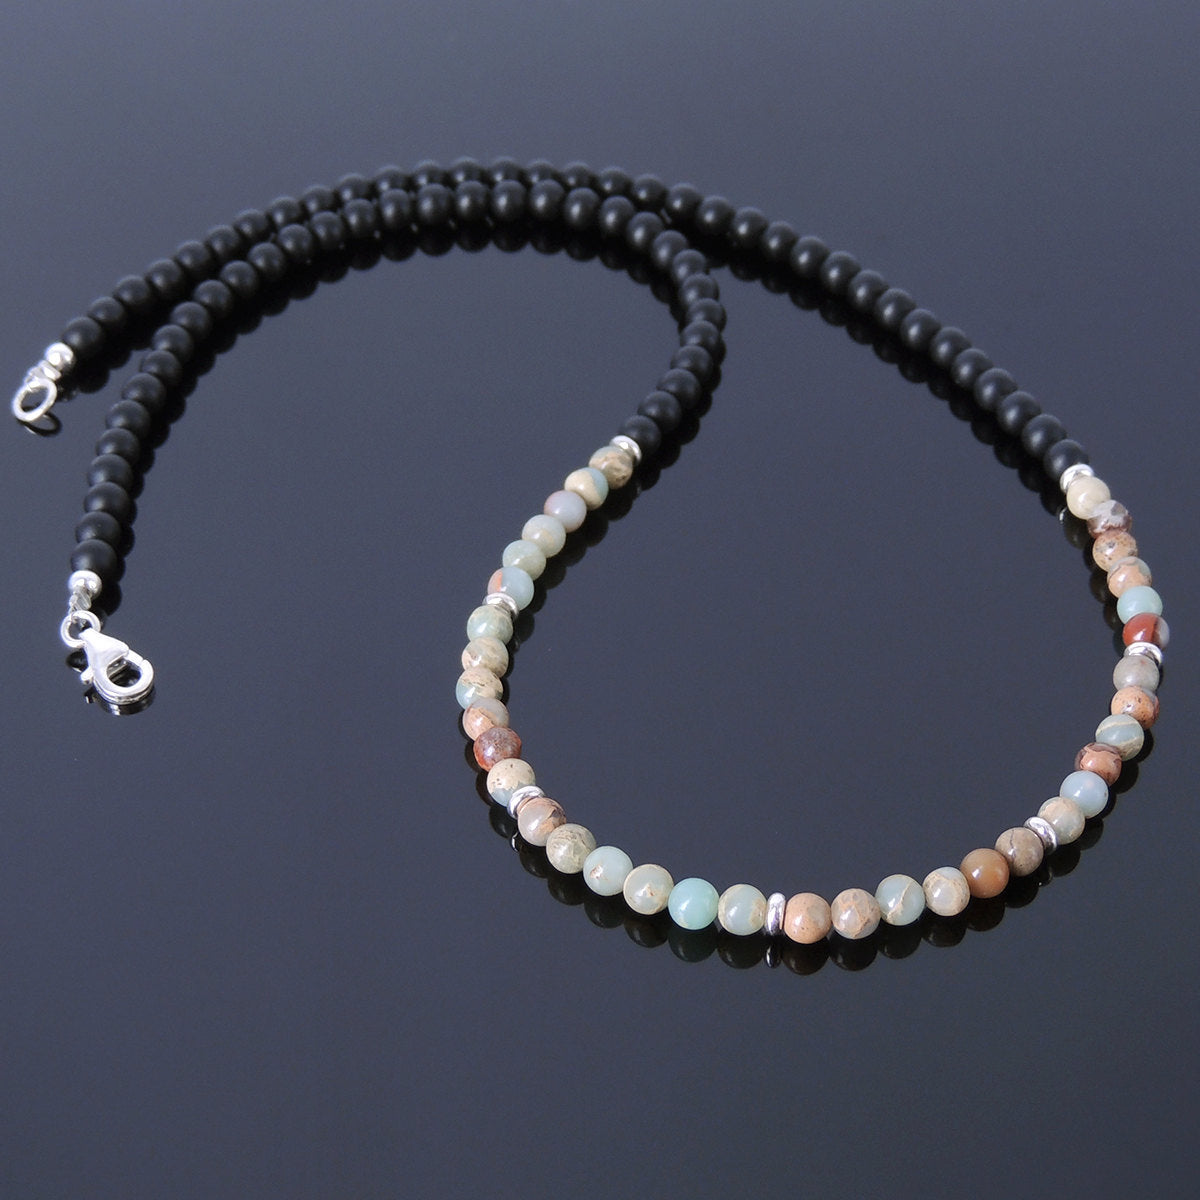 4mm Jasper & Matte Black Onyx Healing Gemstone Necklace with S925 Sterling Silver Spacer Beads & Clasp - Handmade by Gem & Silver NK018